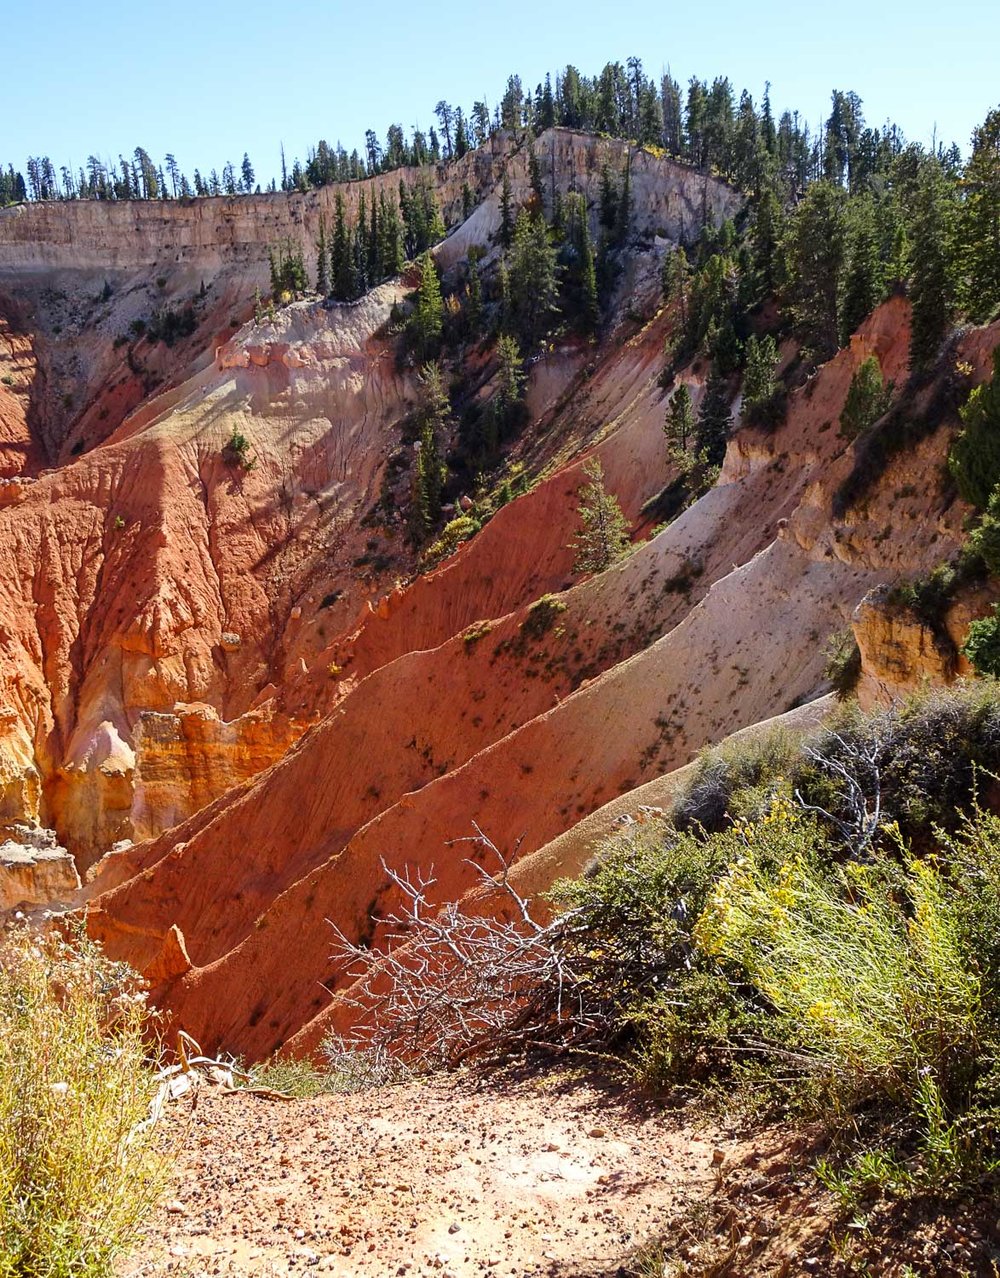 The "Pink Cliffs" of the Grand Staircase